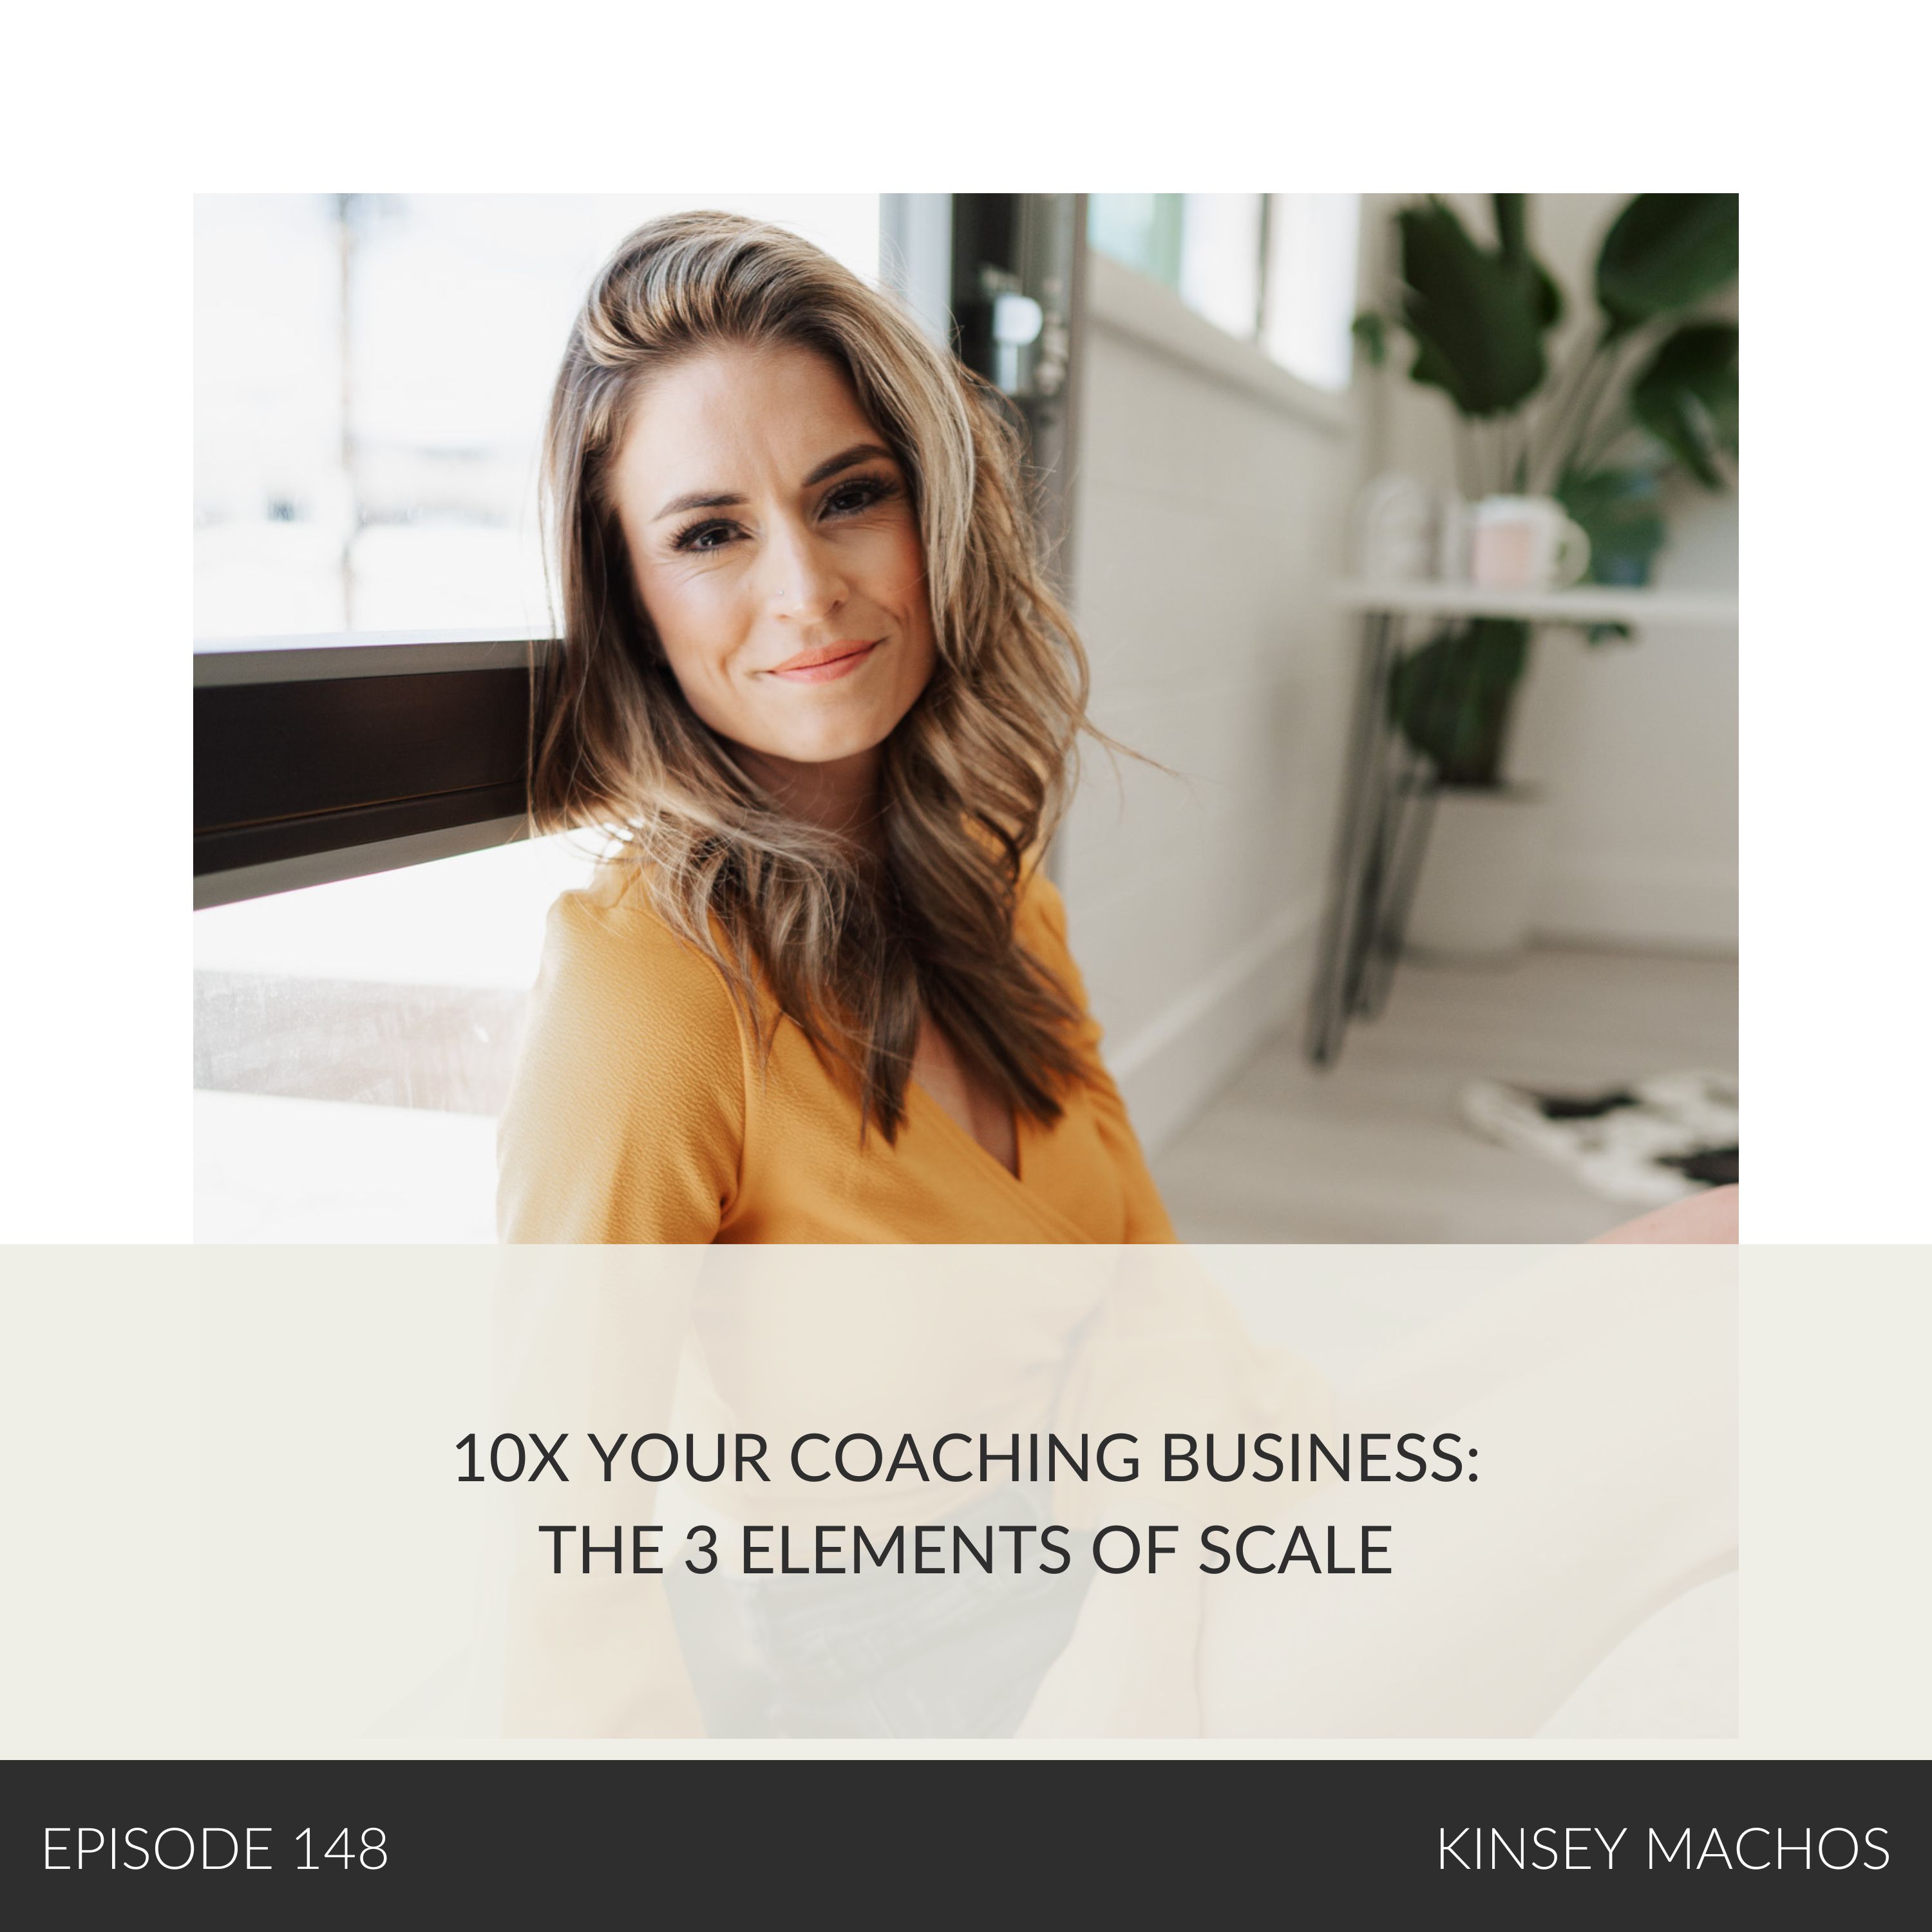 10x Your Coaching Business: The 3 Elements of Scale